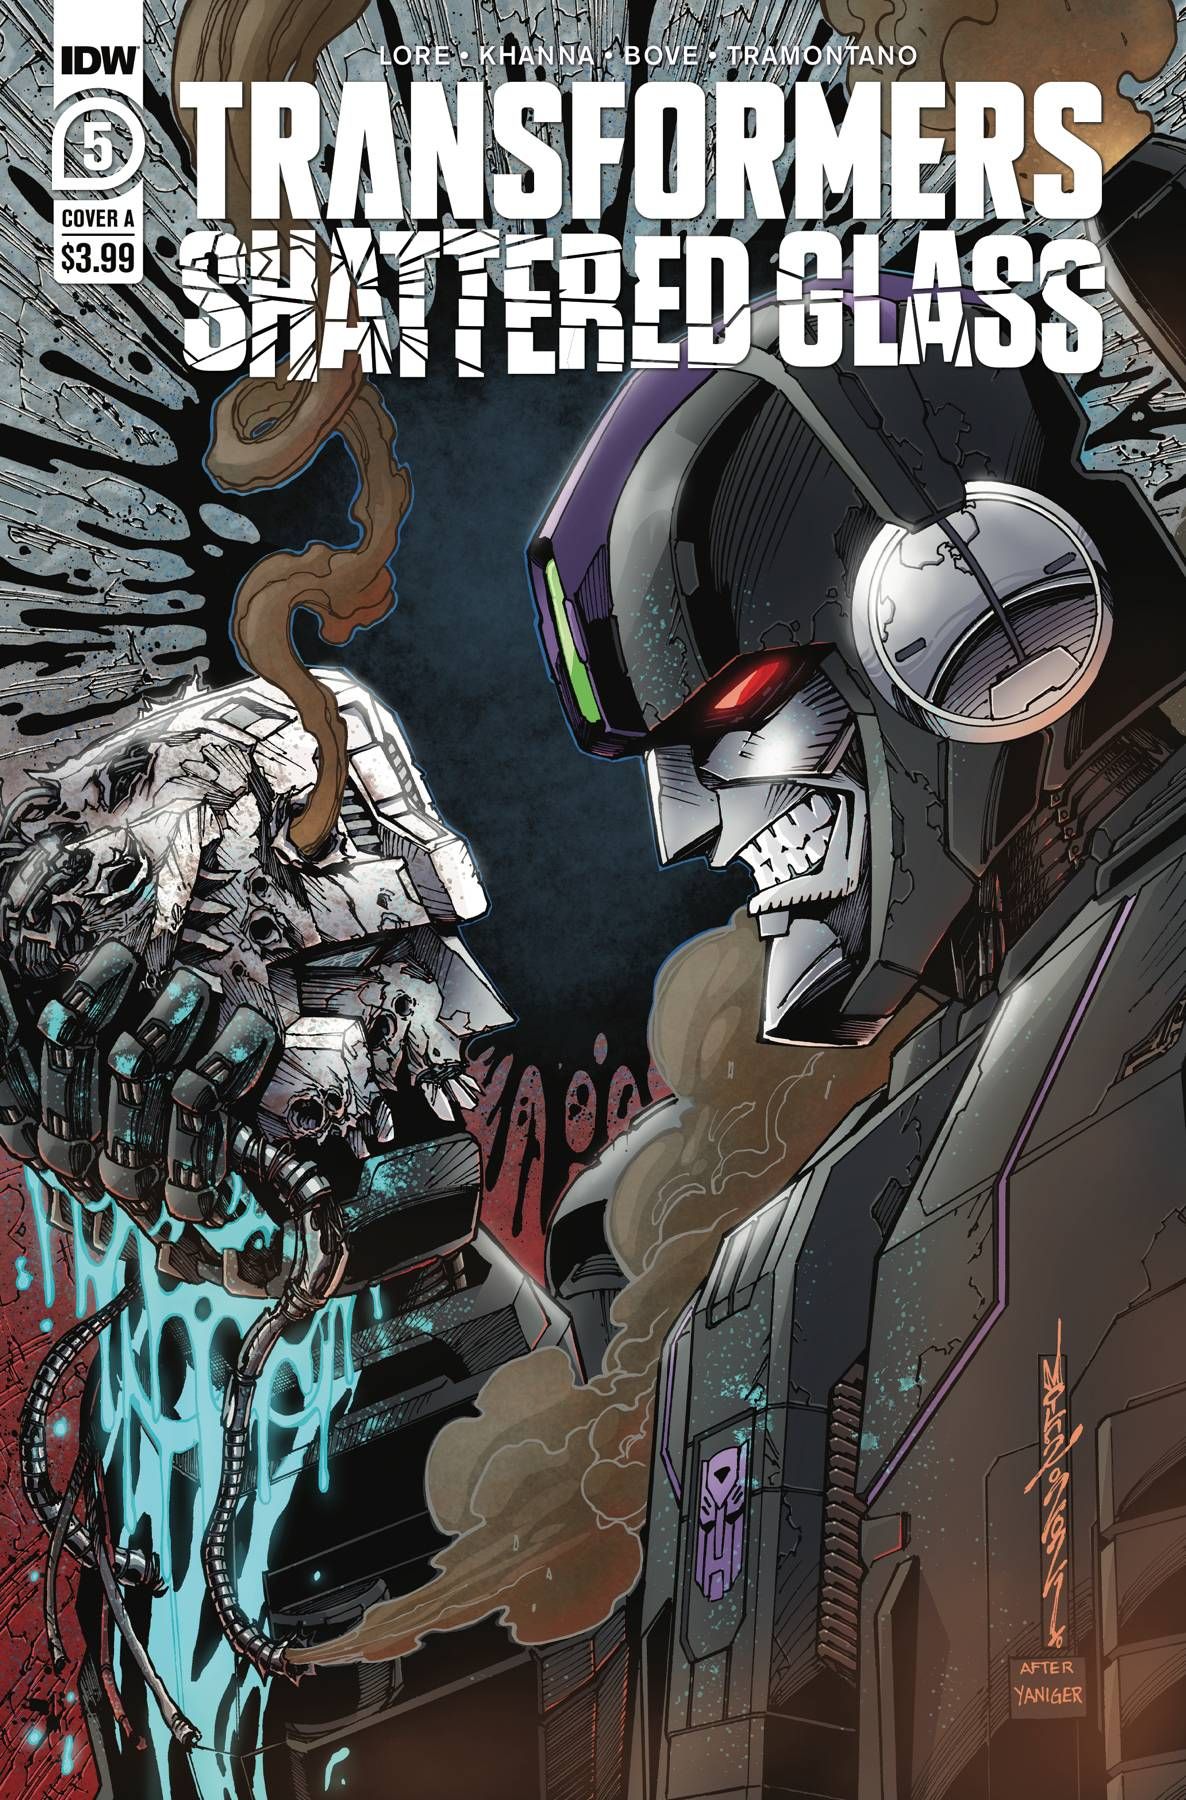 Transformers Shattered Glass #5 Comic